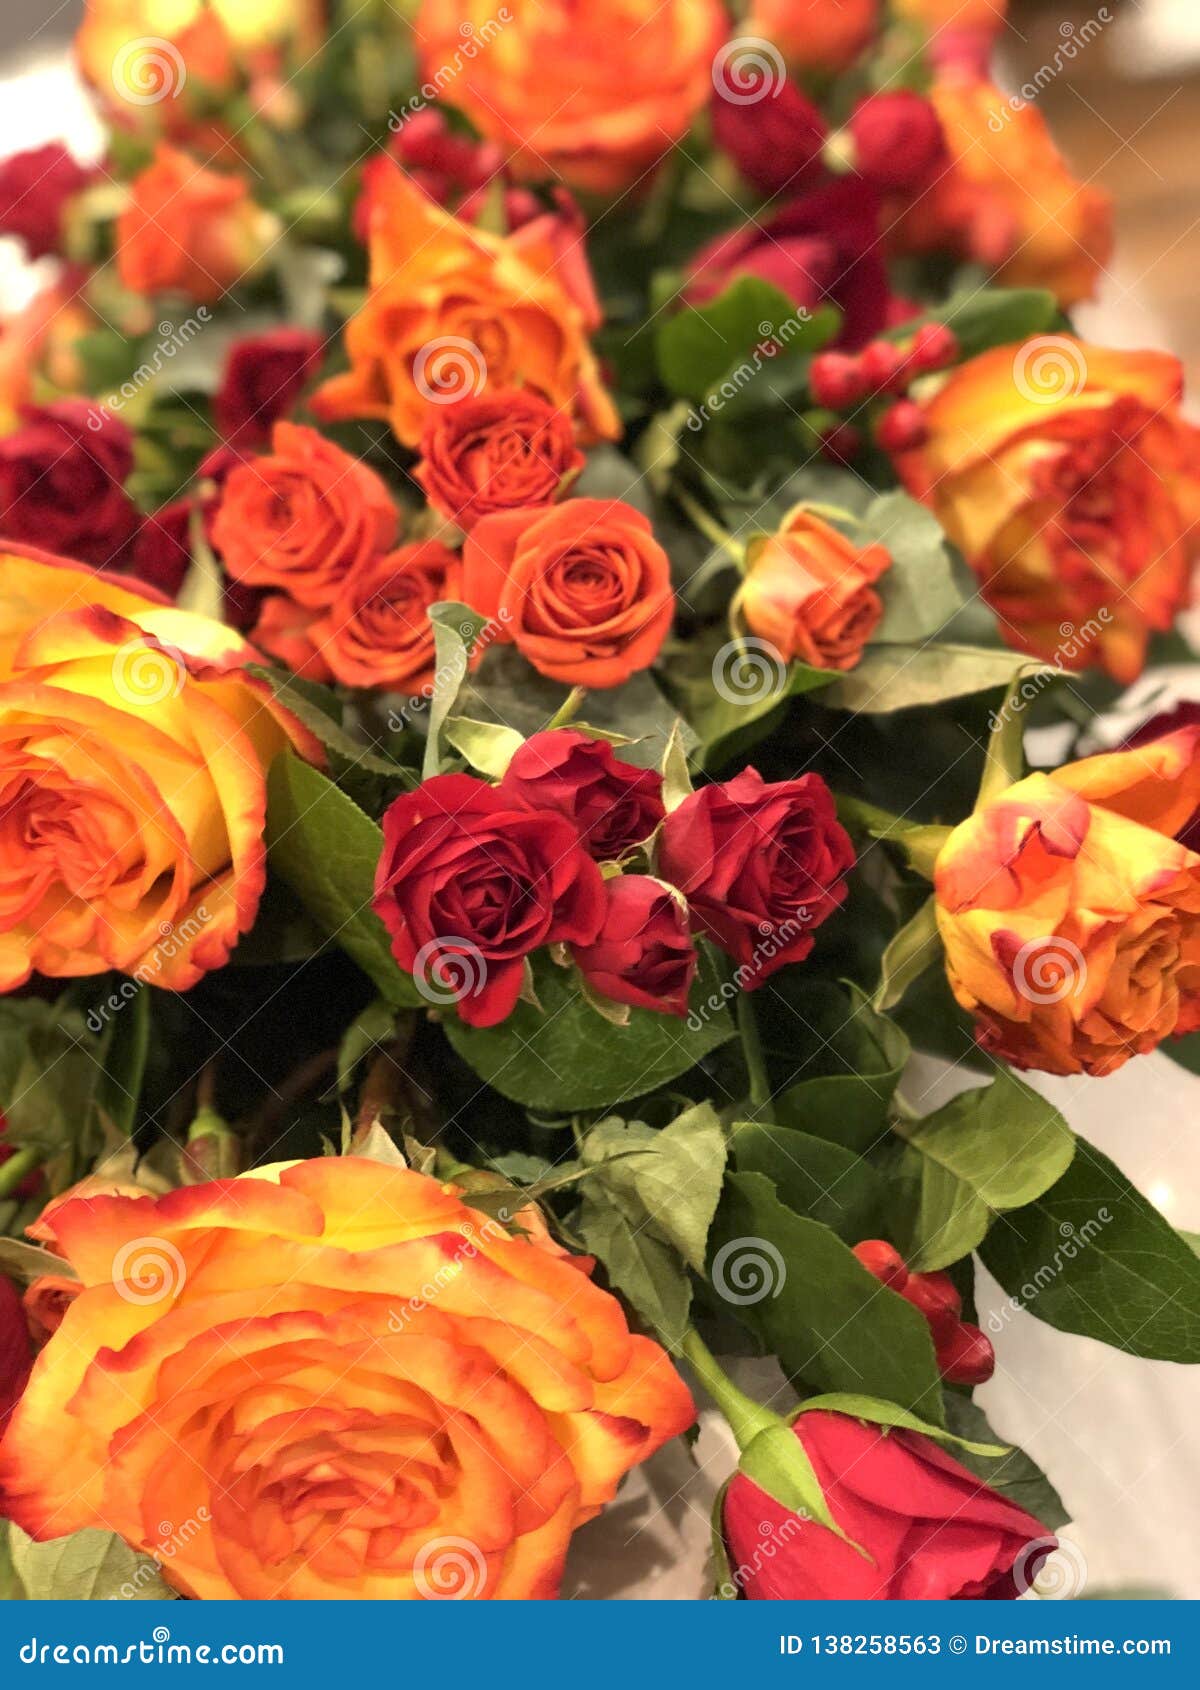 Wedding Decor Orange And Red Roses Table Decoration